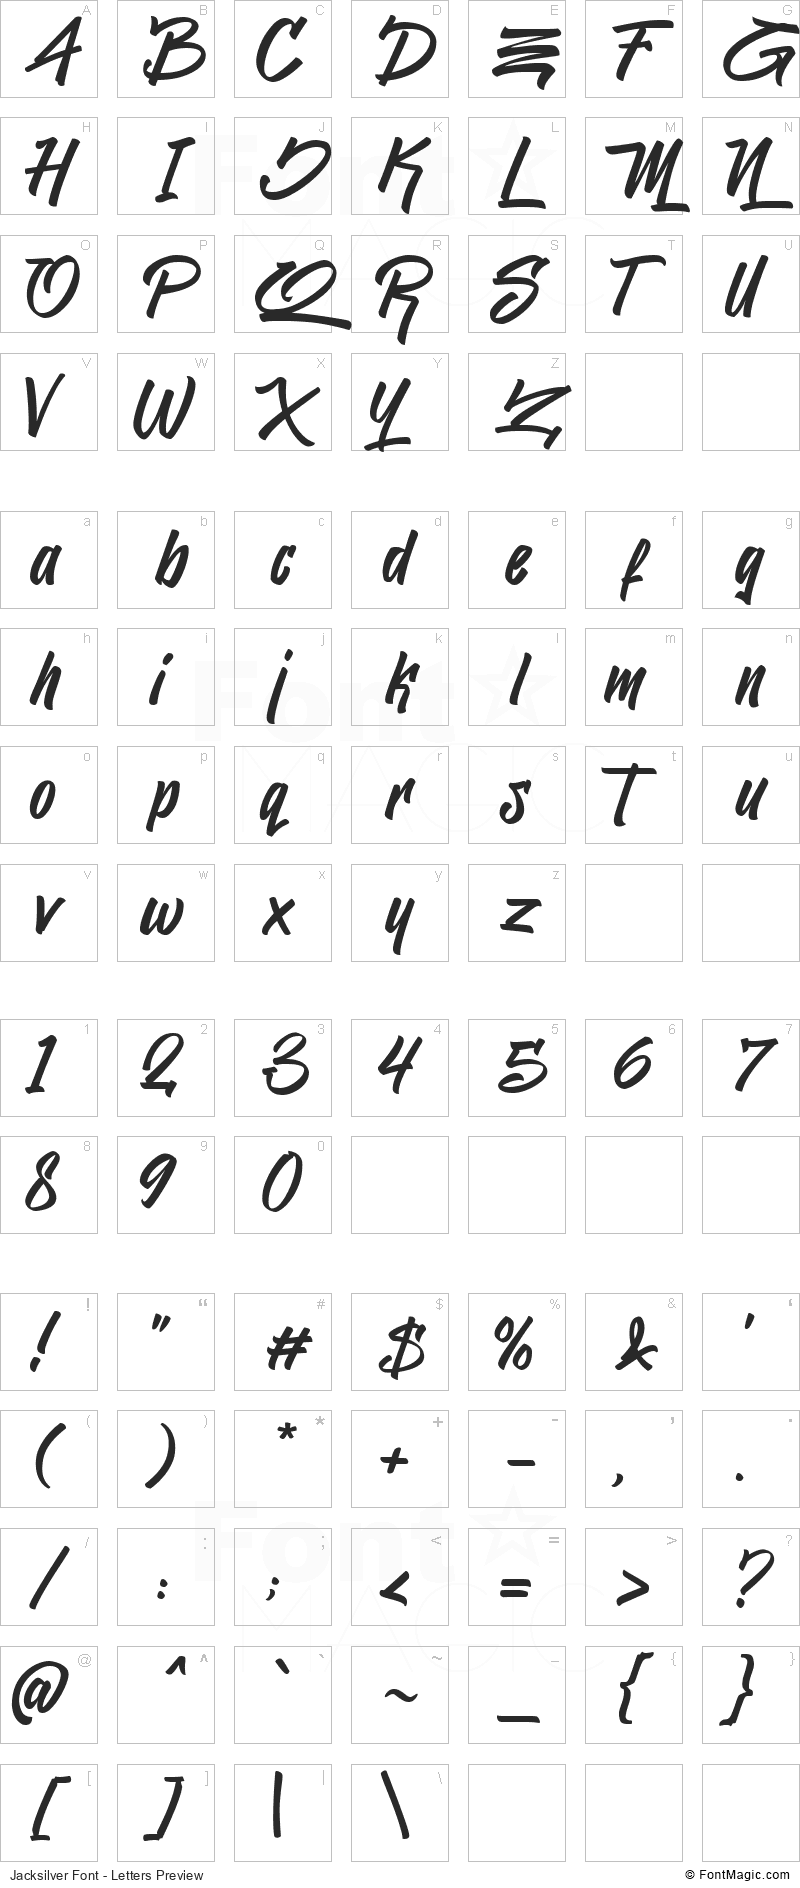 Jacksilver Font - All Latters Preview Chart